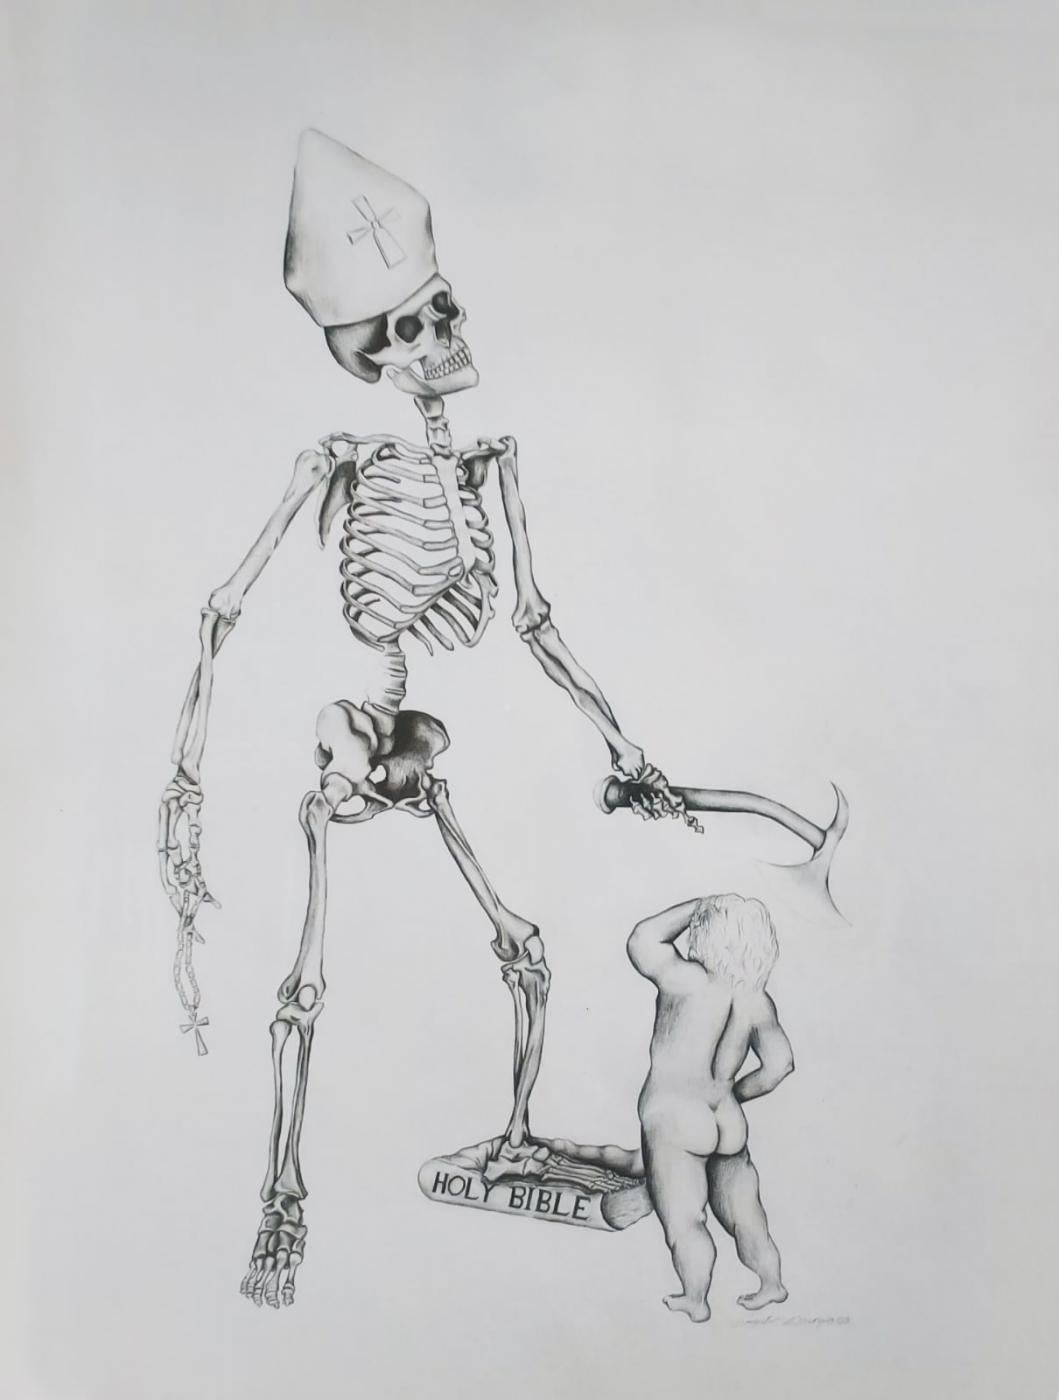 A skeletal figure, adorned only with a papal mitre, wields an axe in one hand and a rosary in the other, its foot resting on a bible. Before it stands a small, naked child, turned away from us, the fear or tears palpable even without seeing the face. Edwards' composition is stark and clean, the white background serving to amplify the intricate details of the figures. This piece is a poignant commentary on innocence lost, power misused, and faith betrayed.